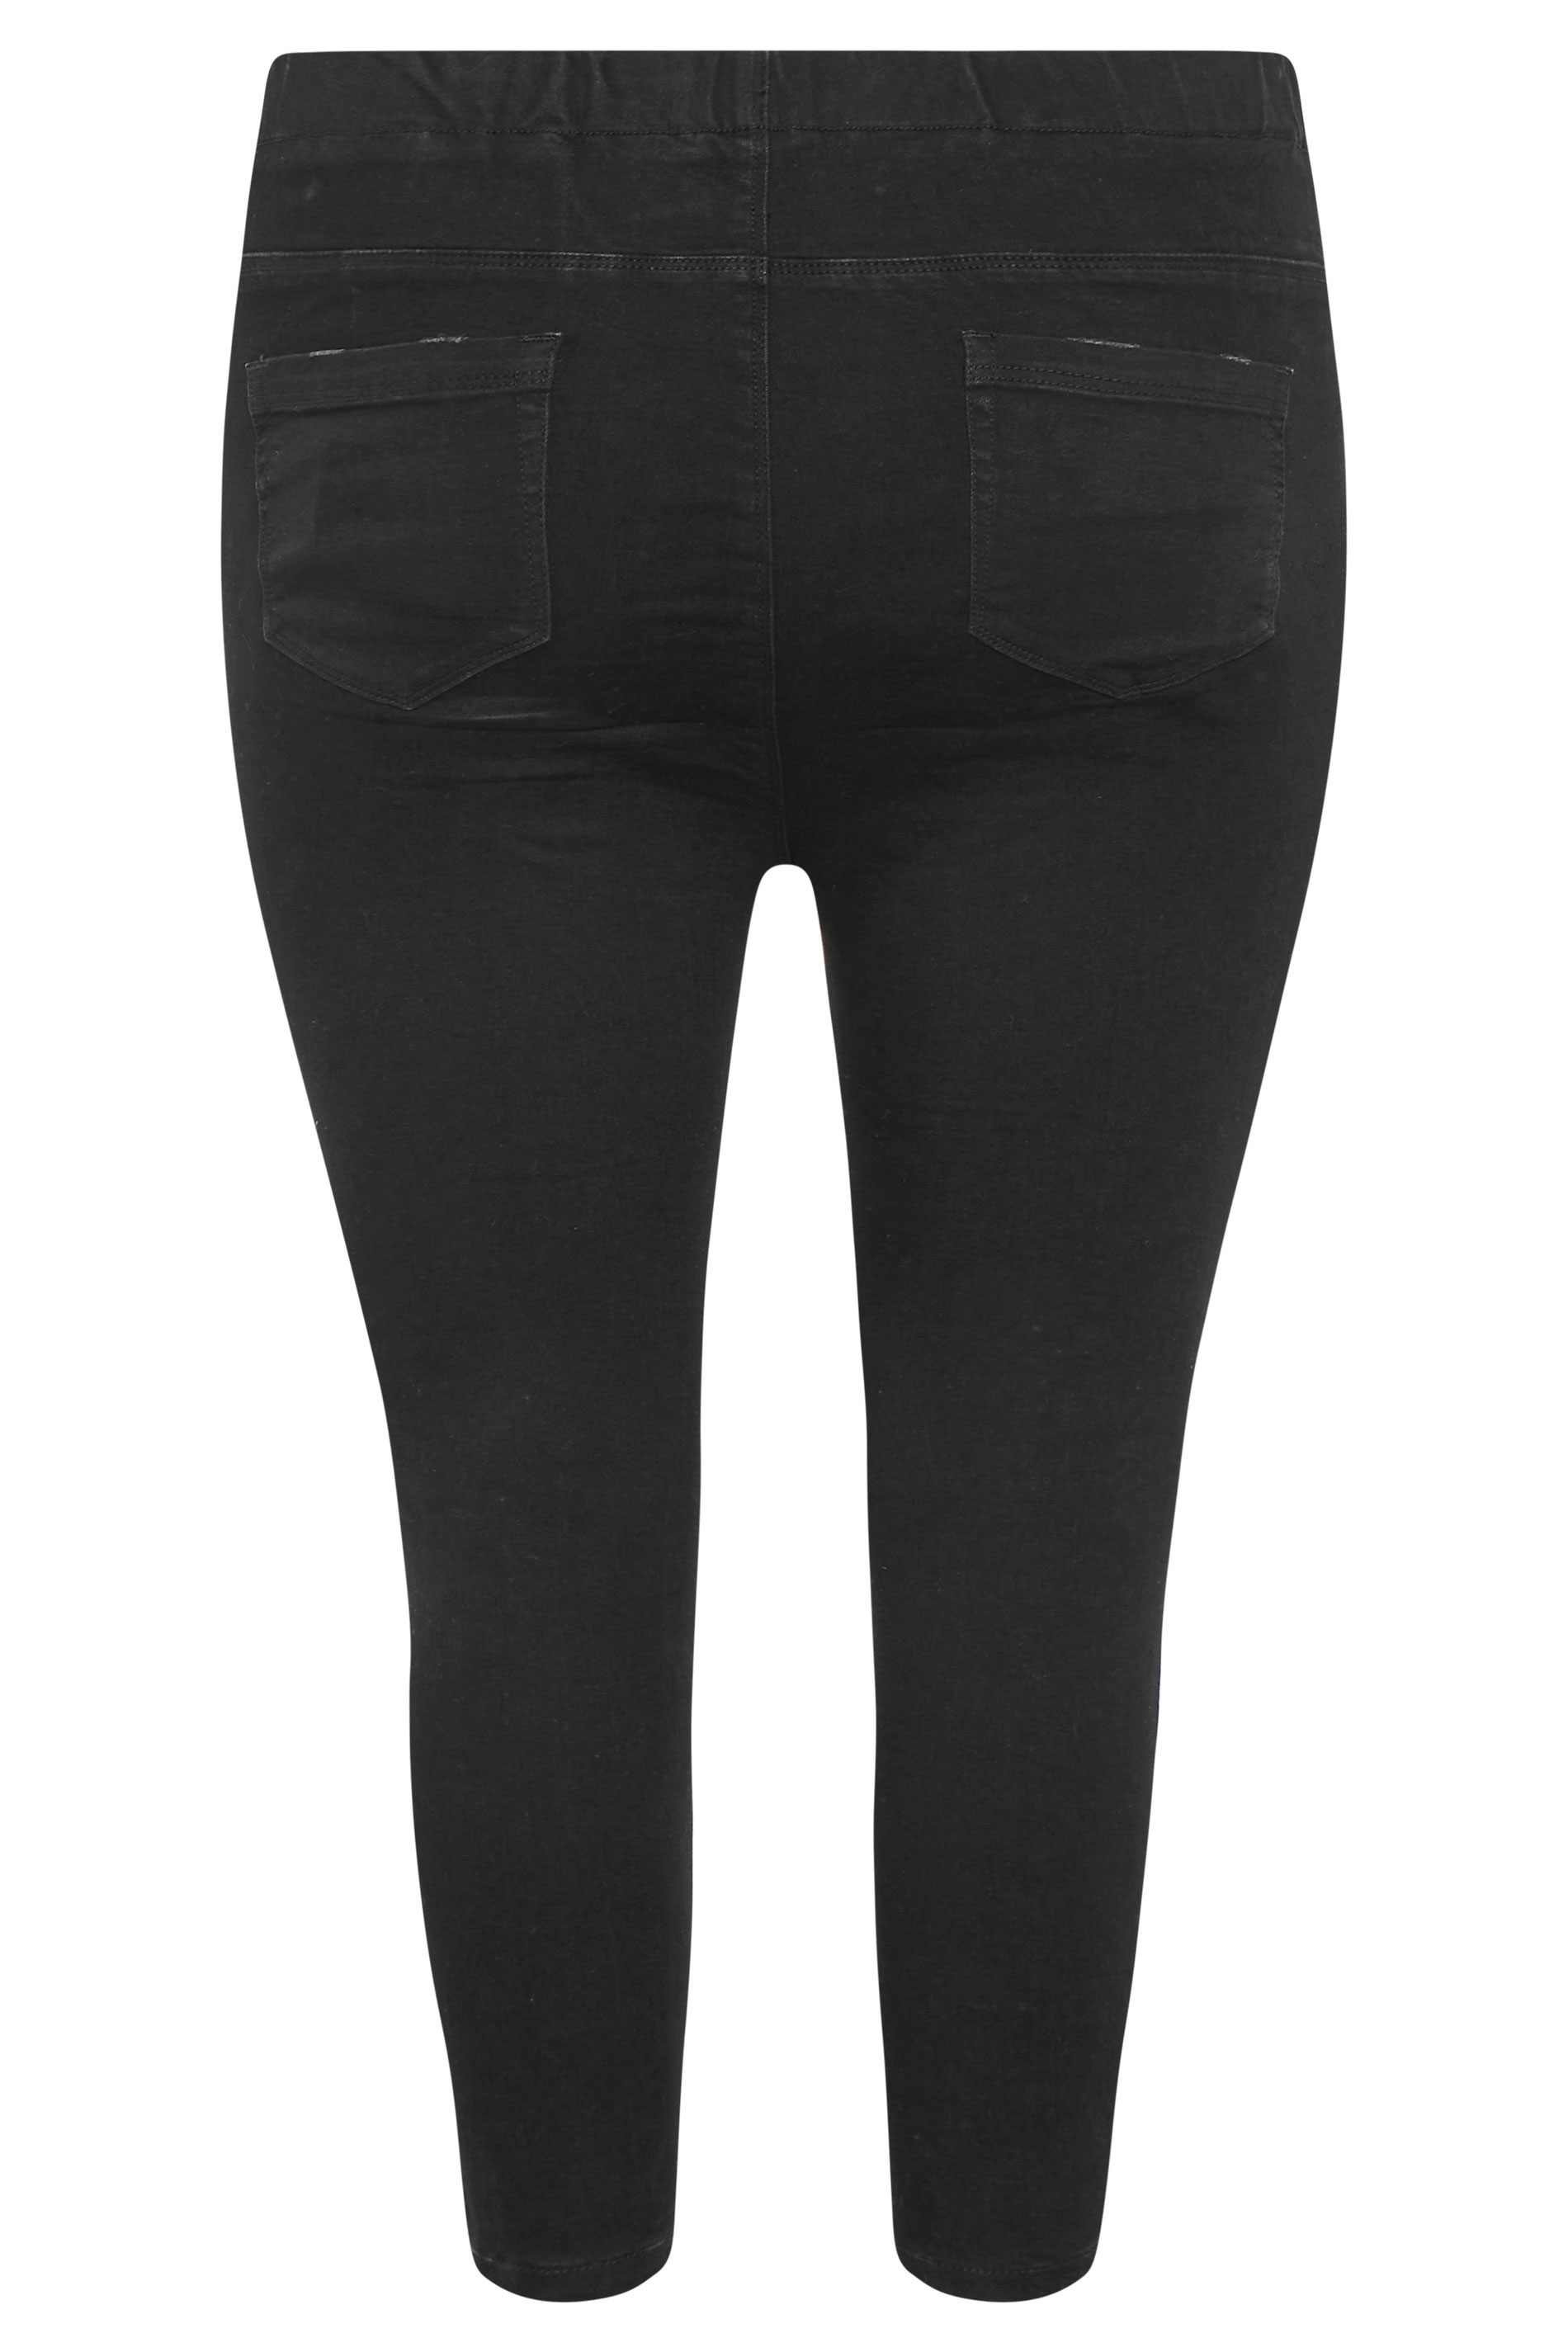 Black Extreme Ripped Cropped JENNY Jeggings | Yours Clothing